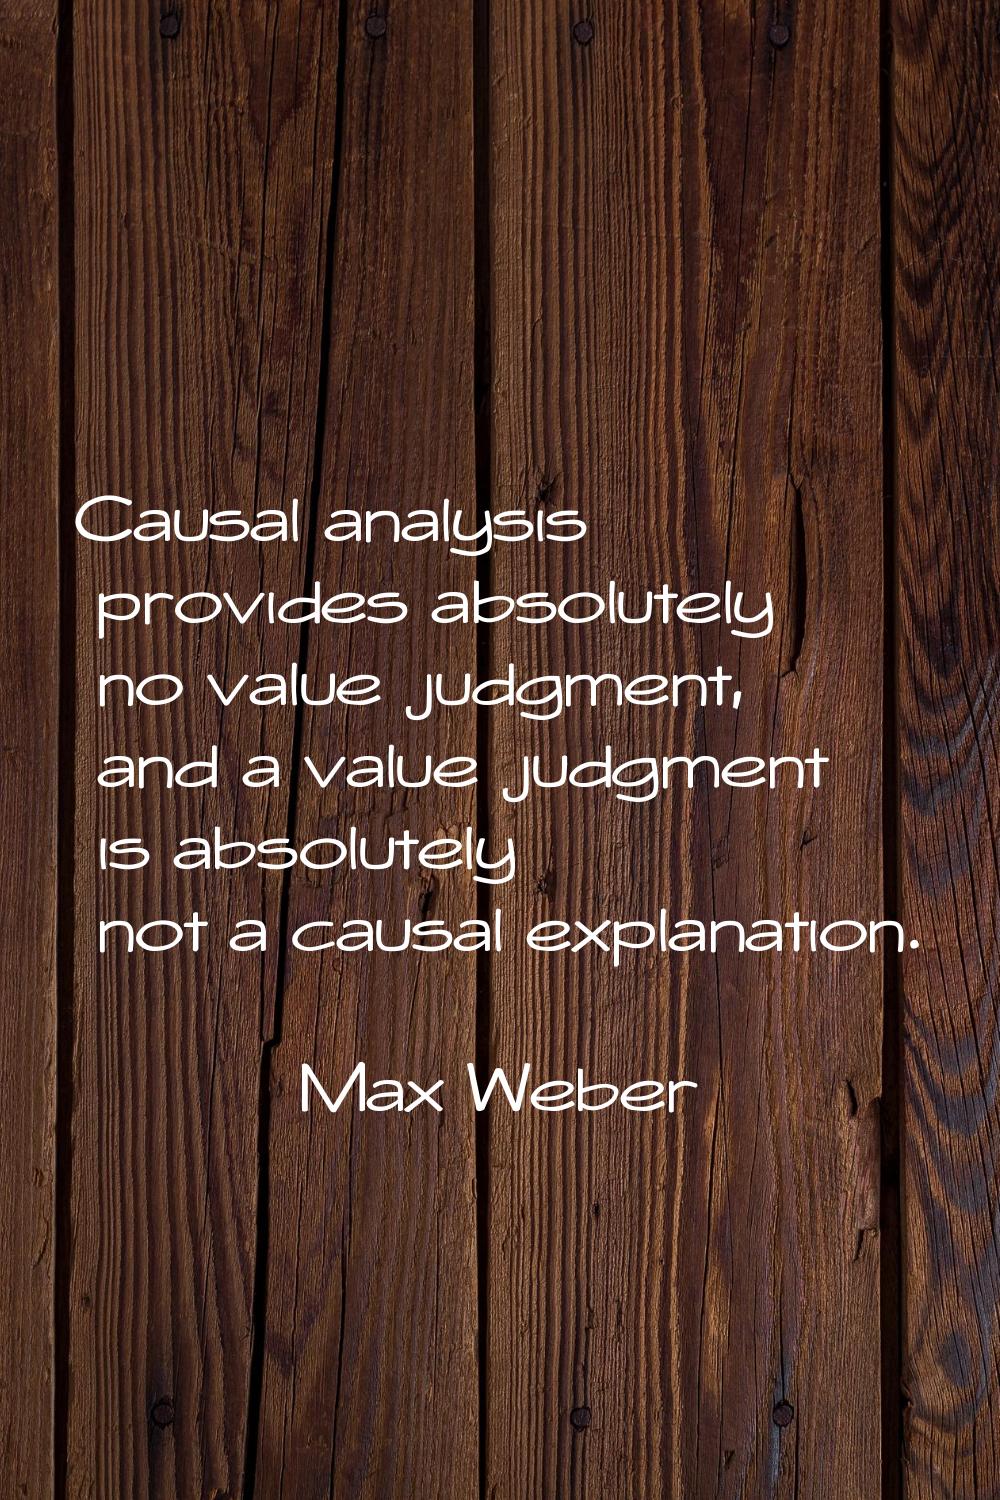 Causal analysis provides absolutely no value judgment, and a value judgment is absolutely not a cau